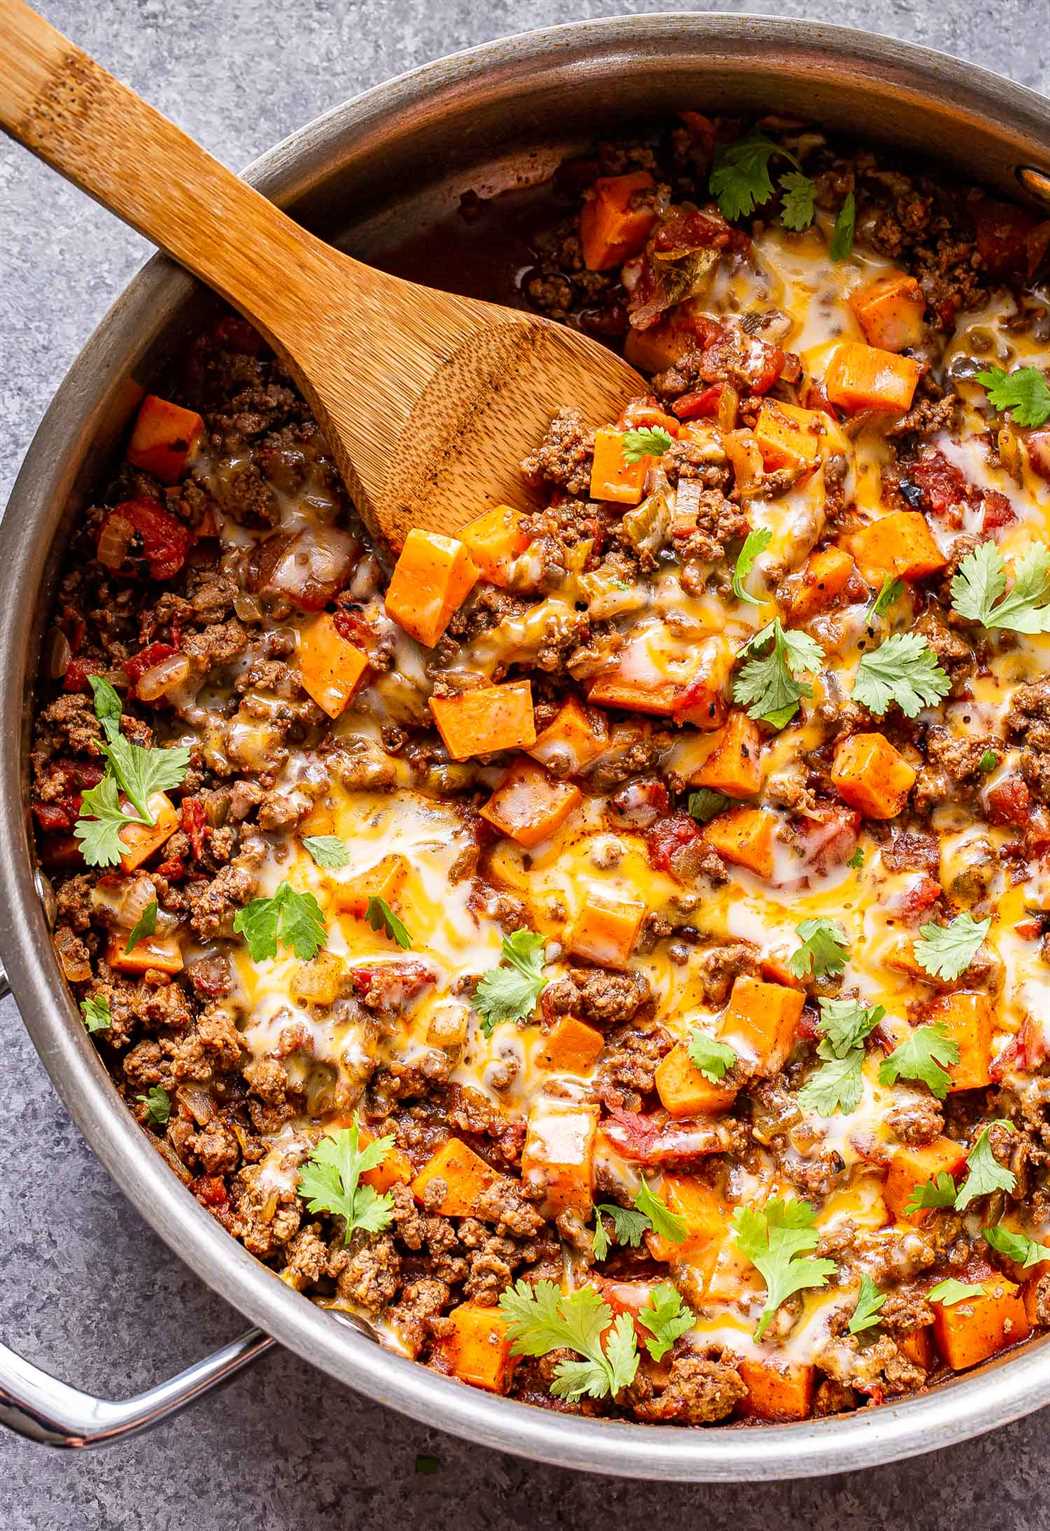 Overhead photo of a metal skillet filled with ground beef, tomatoes, sweet potatoes, southwest spices and topped with melted cheese and cilantro. Wooden serving spoon in the skillet.